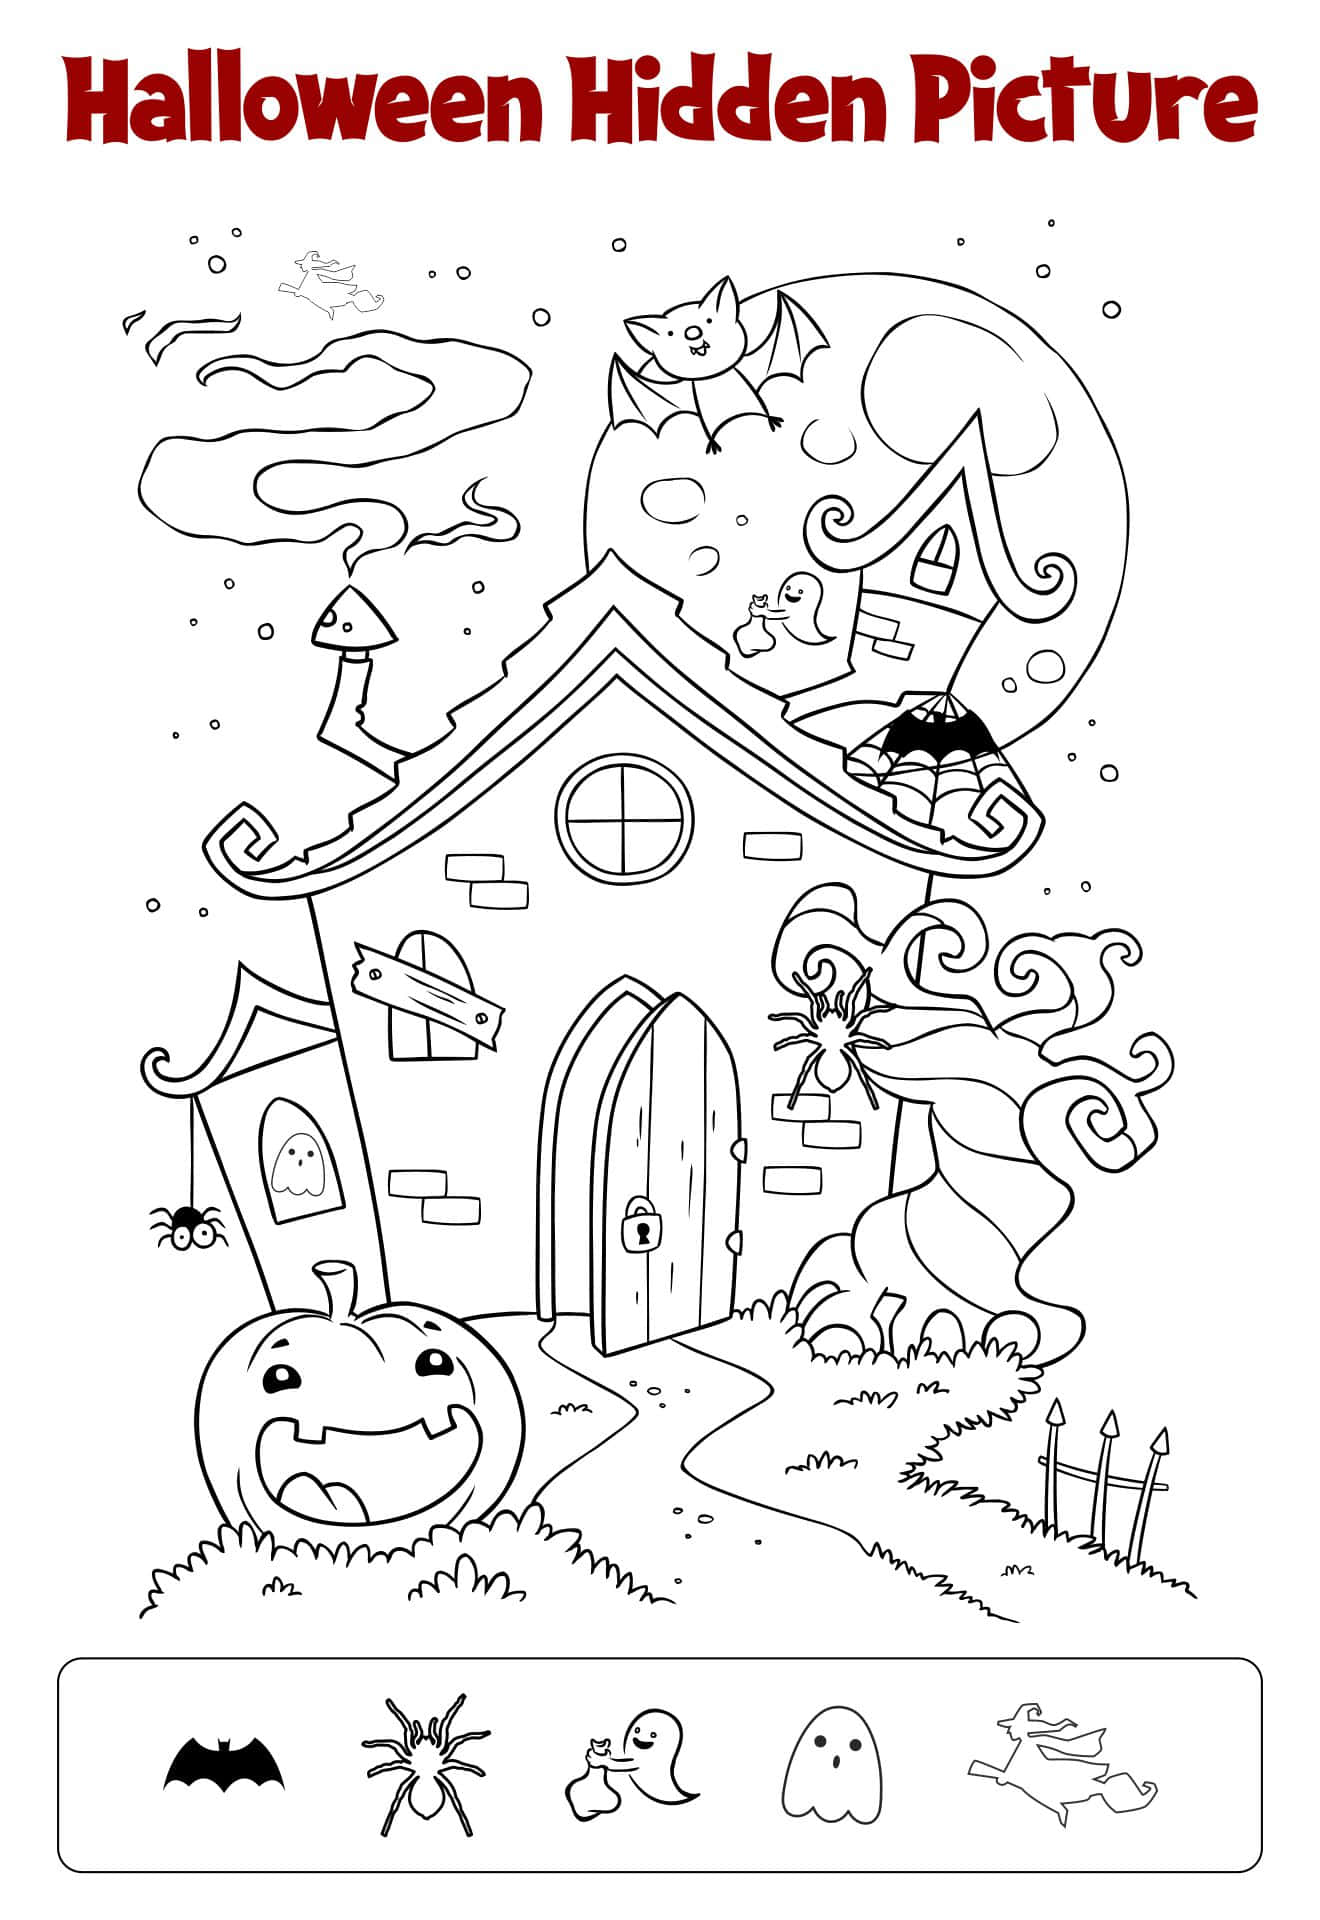 Put your detective skills to the test and find your way through spooky Halloween puzzles! Wallpaper